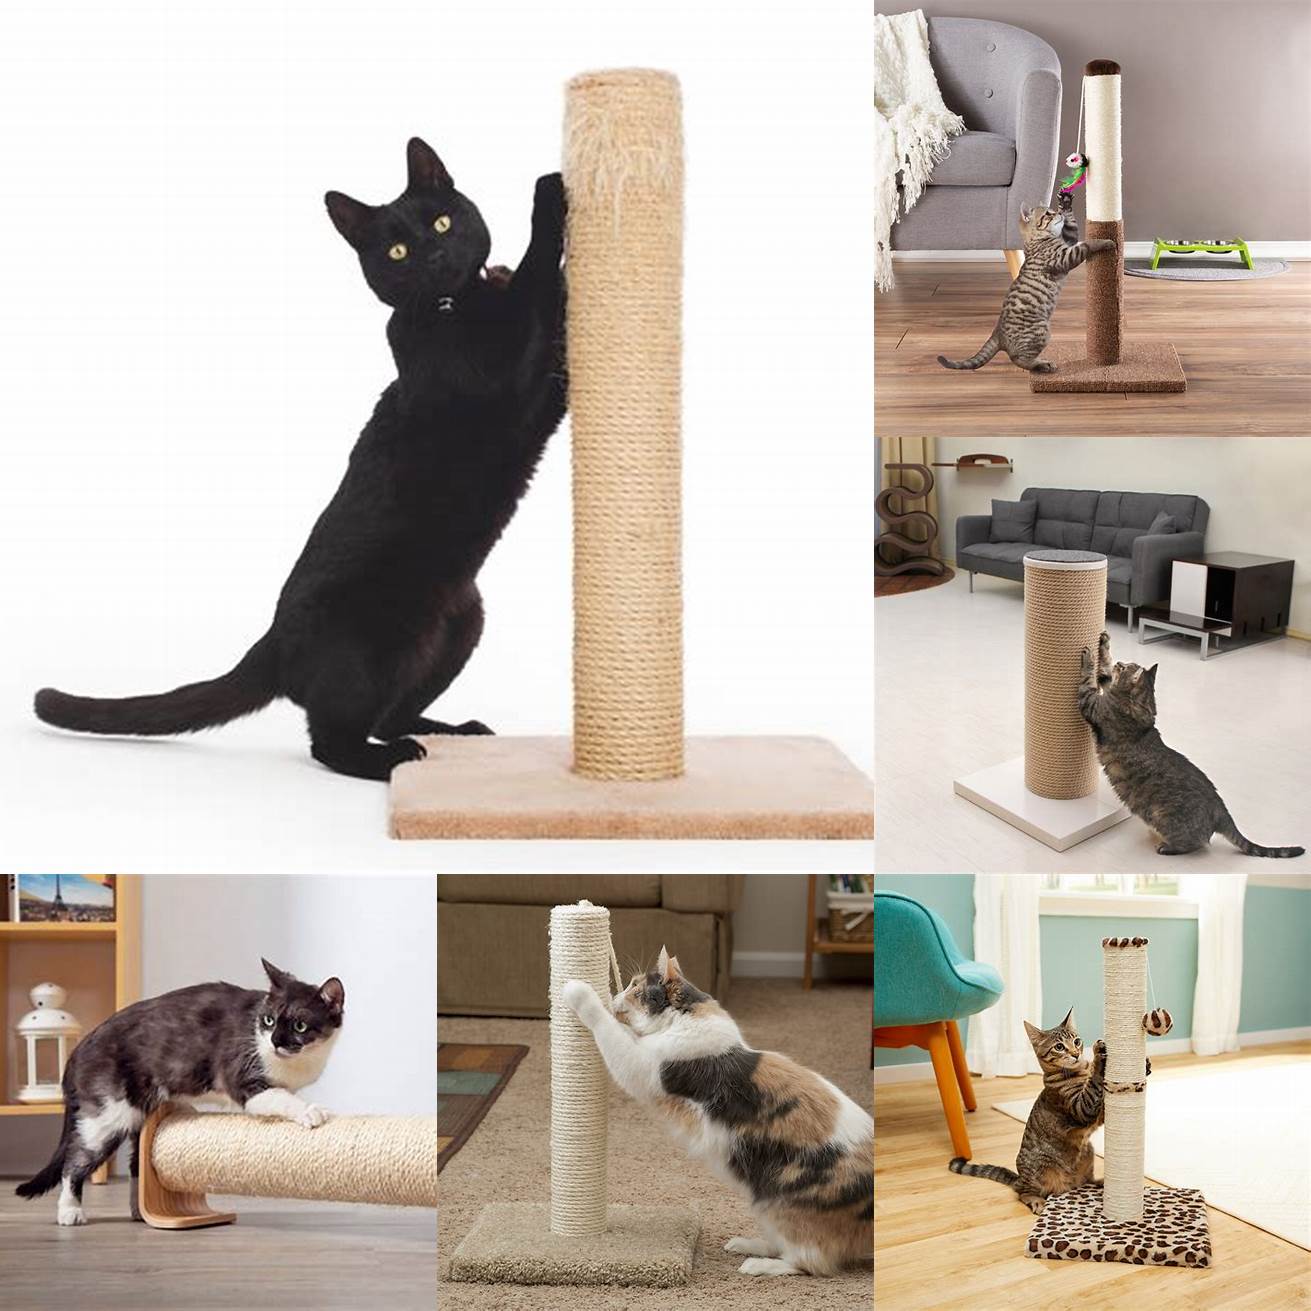 4 Consider using a scratching post